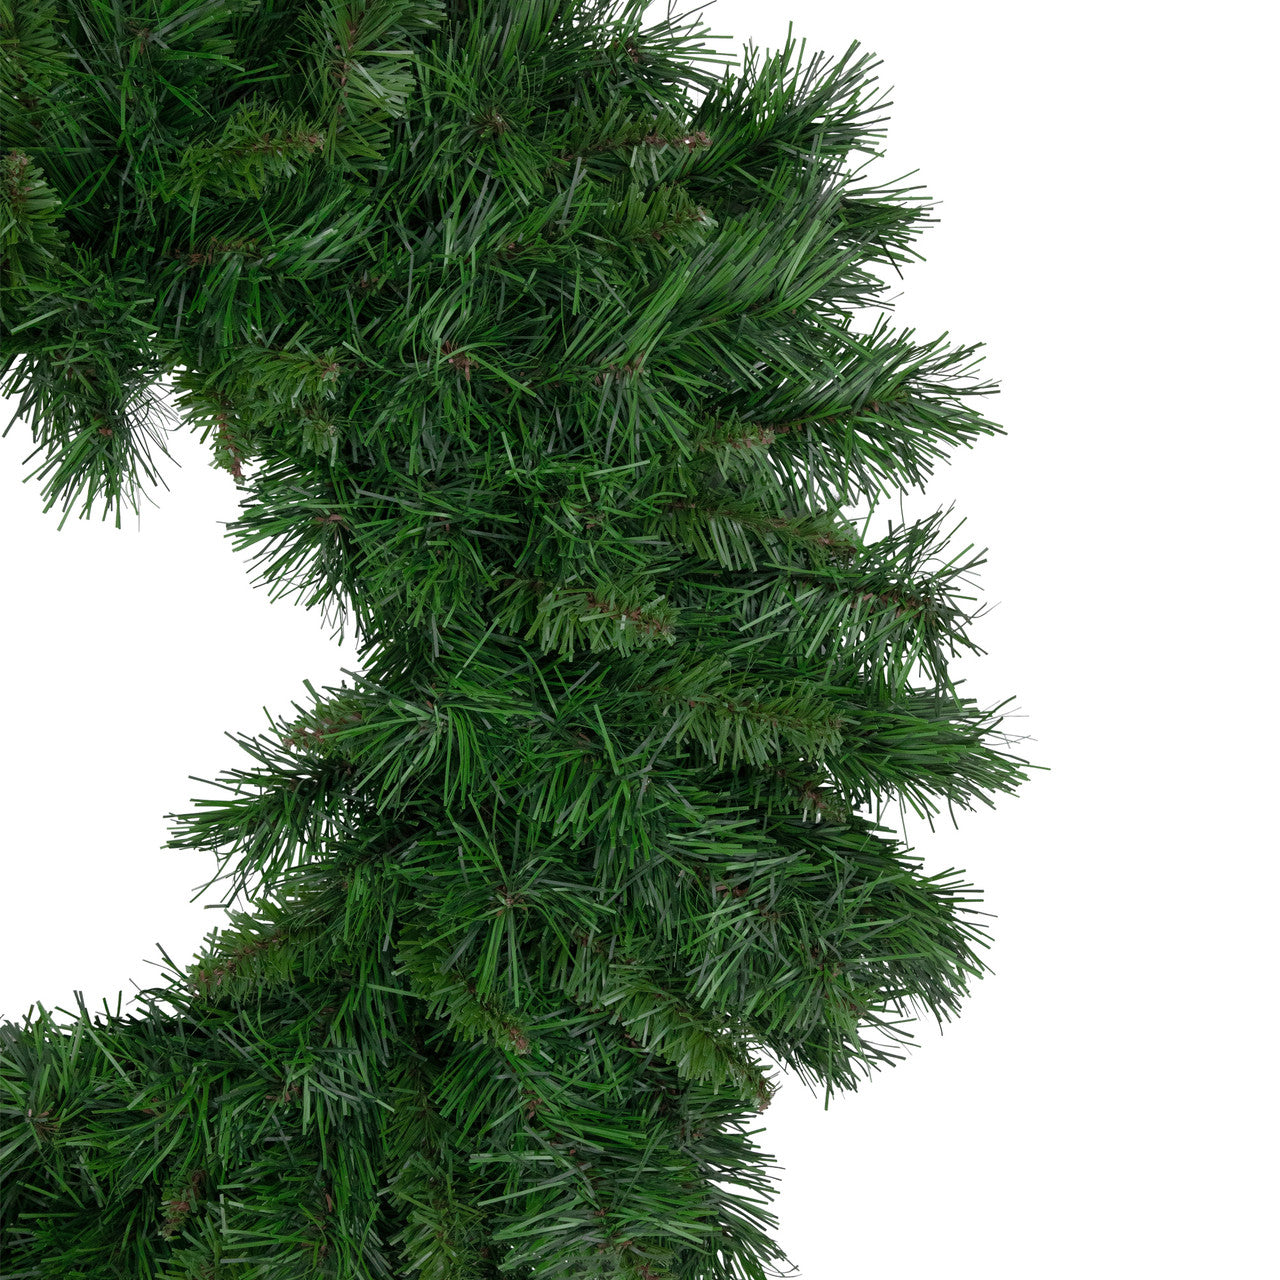 Lush Mixed Pine Artificial Christmas Wreath, 24-Inch, Unlit